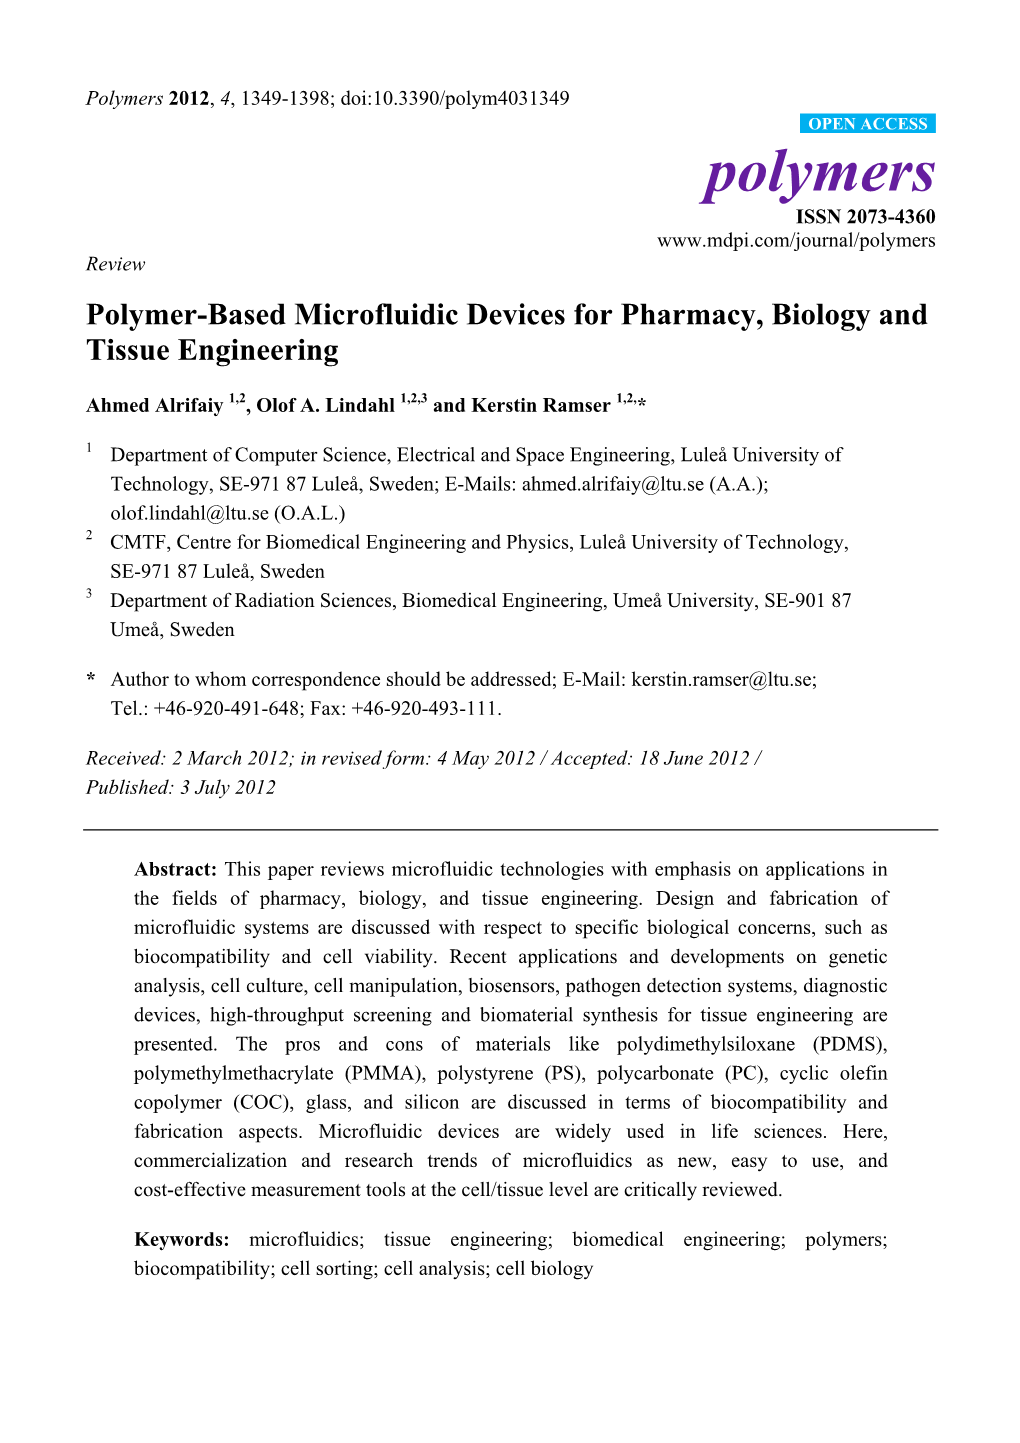 Polymer-Based Microfluidic Devices for Pharmacy, Biology and Tissue Engineering